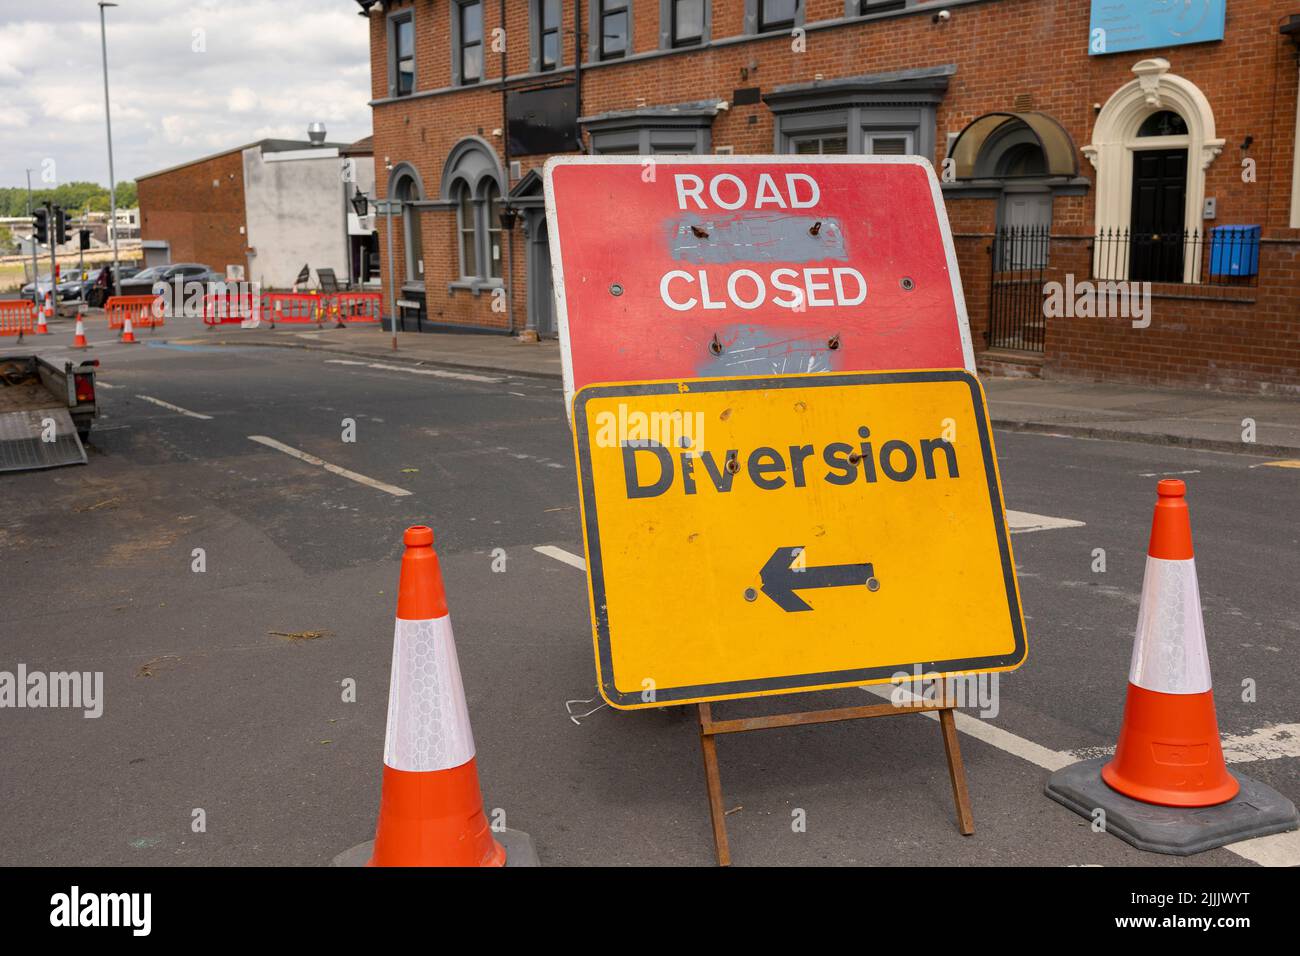 Road ahead closed and diversion signs Stock Photo